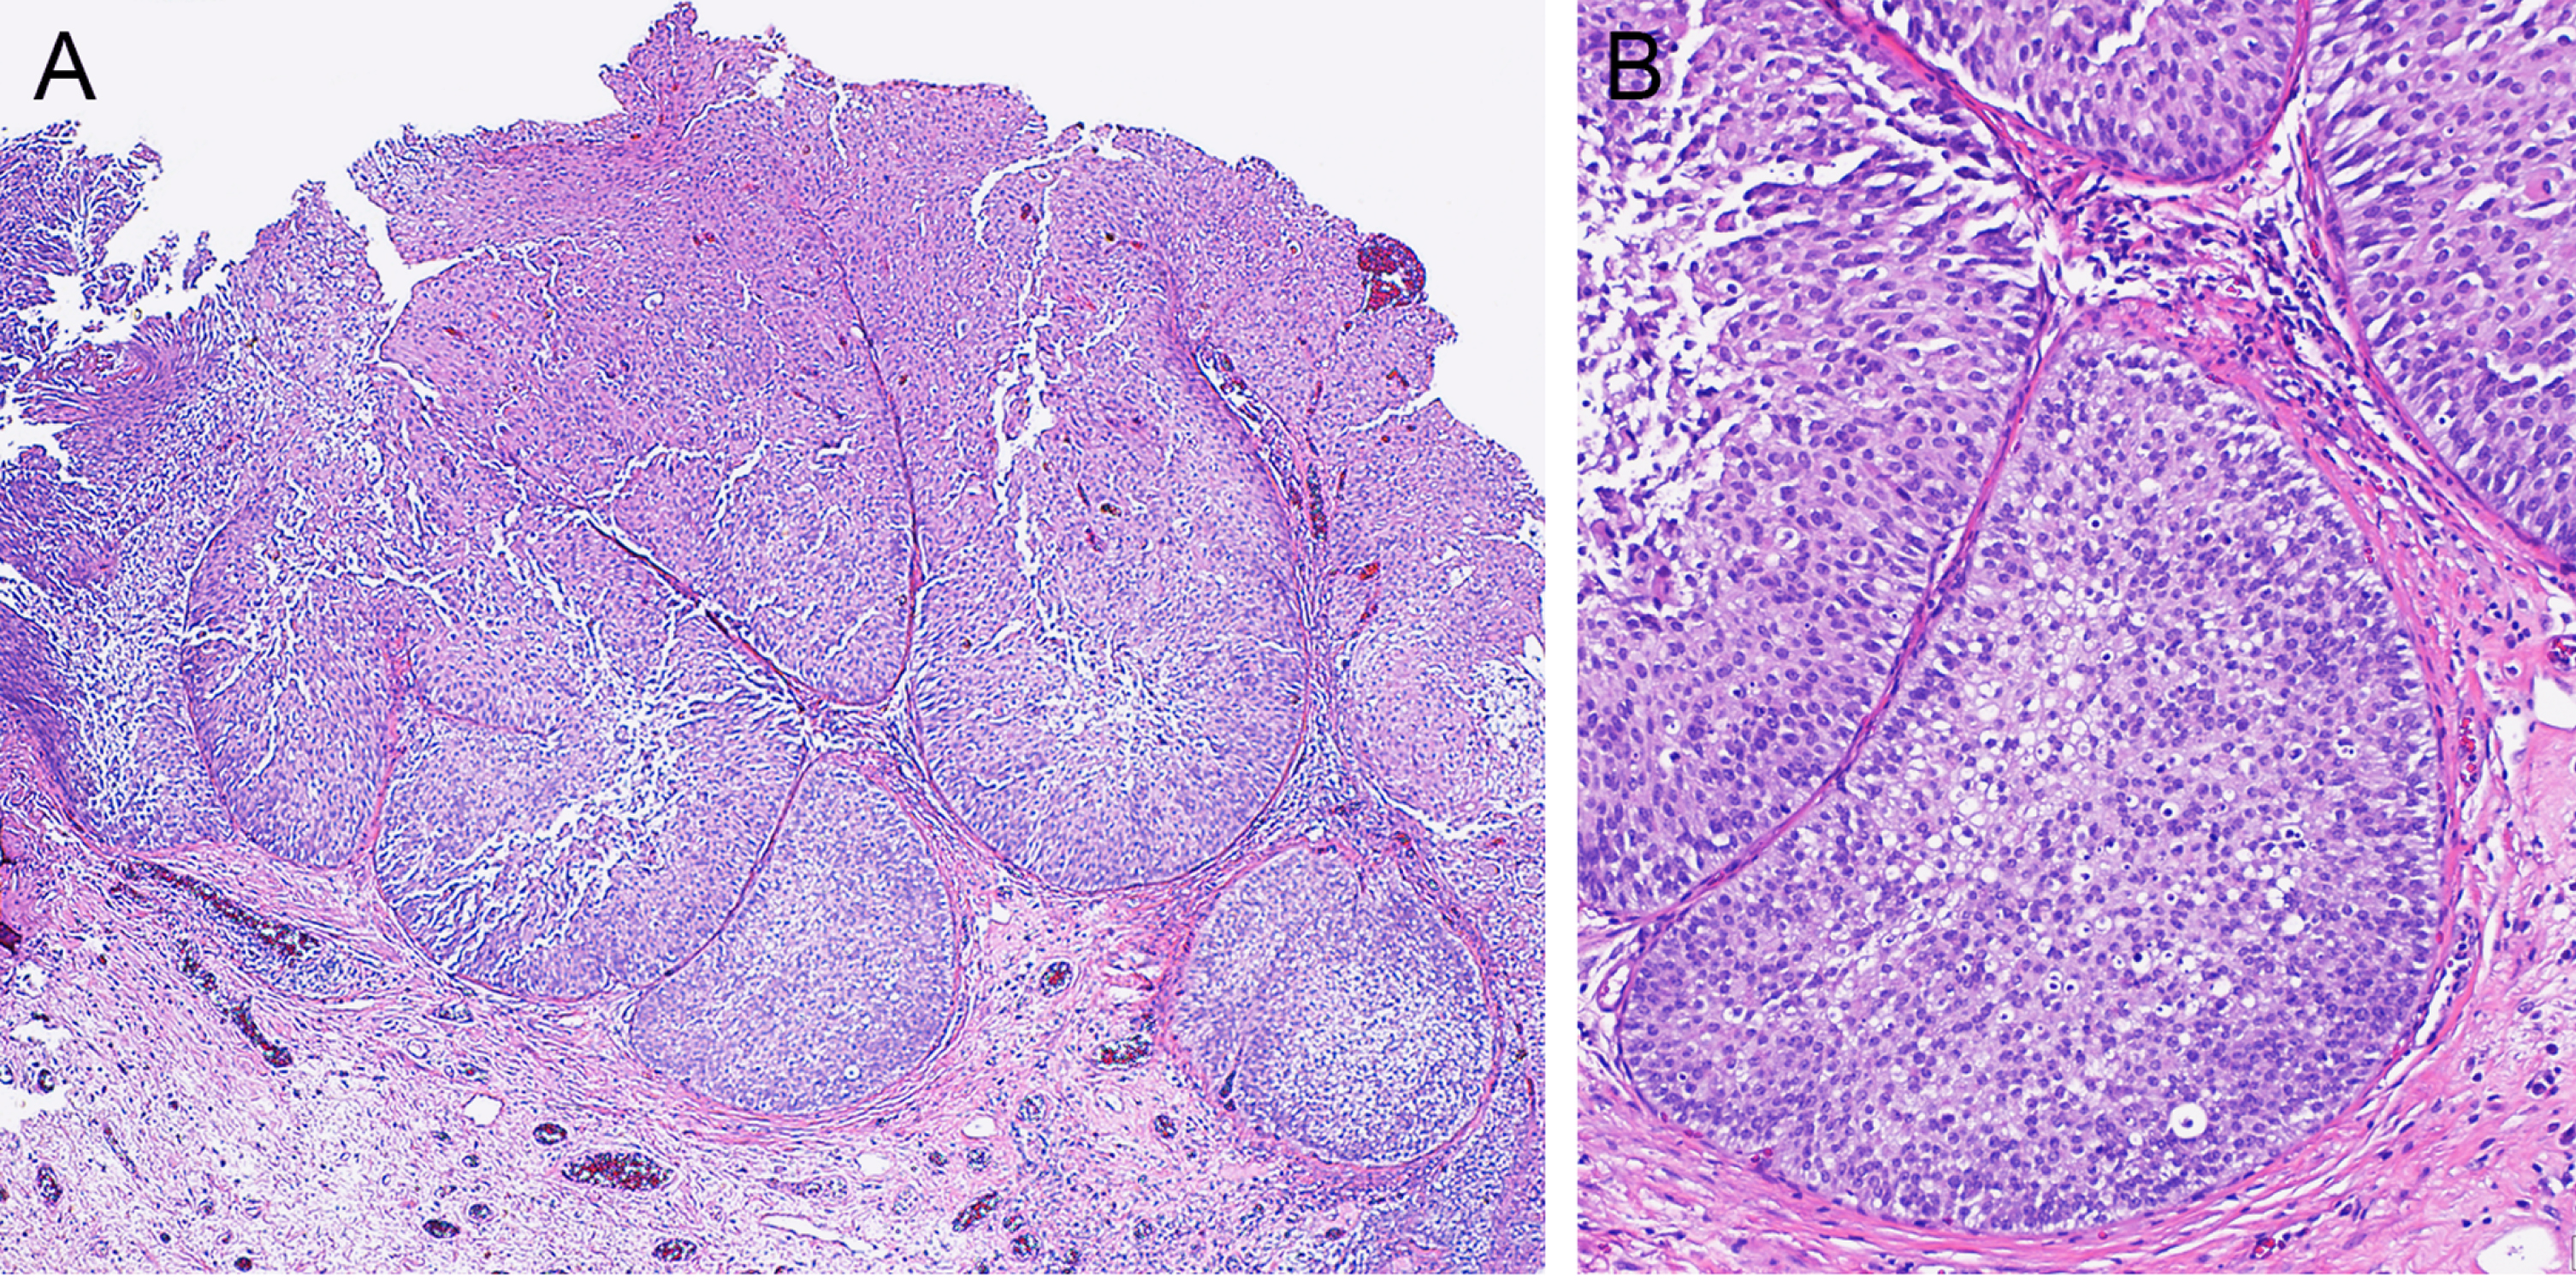 Papillary urothelial carcinoma shows an inverted growth pattern. A. The tumor shows large nests with broad pushing borders in the lamina propria (×40). B. The tumor shows low-grade features (×100).